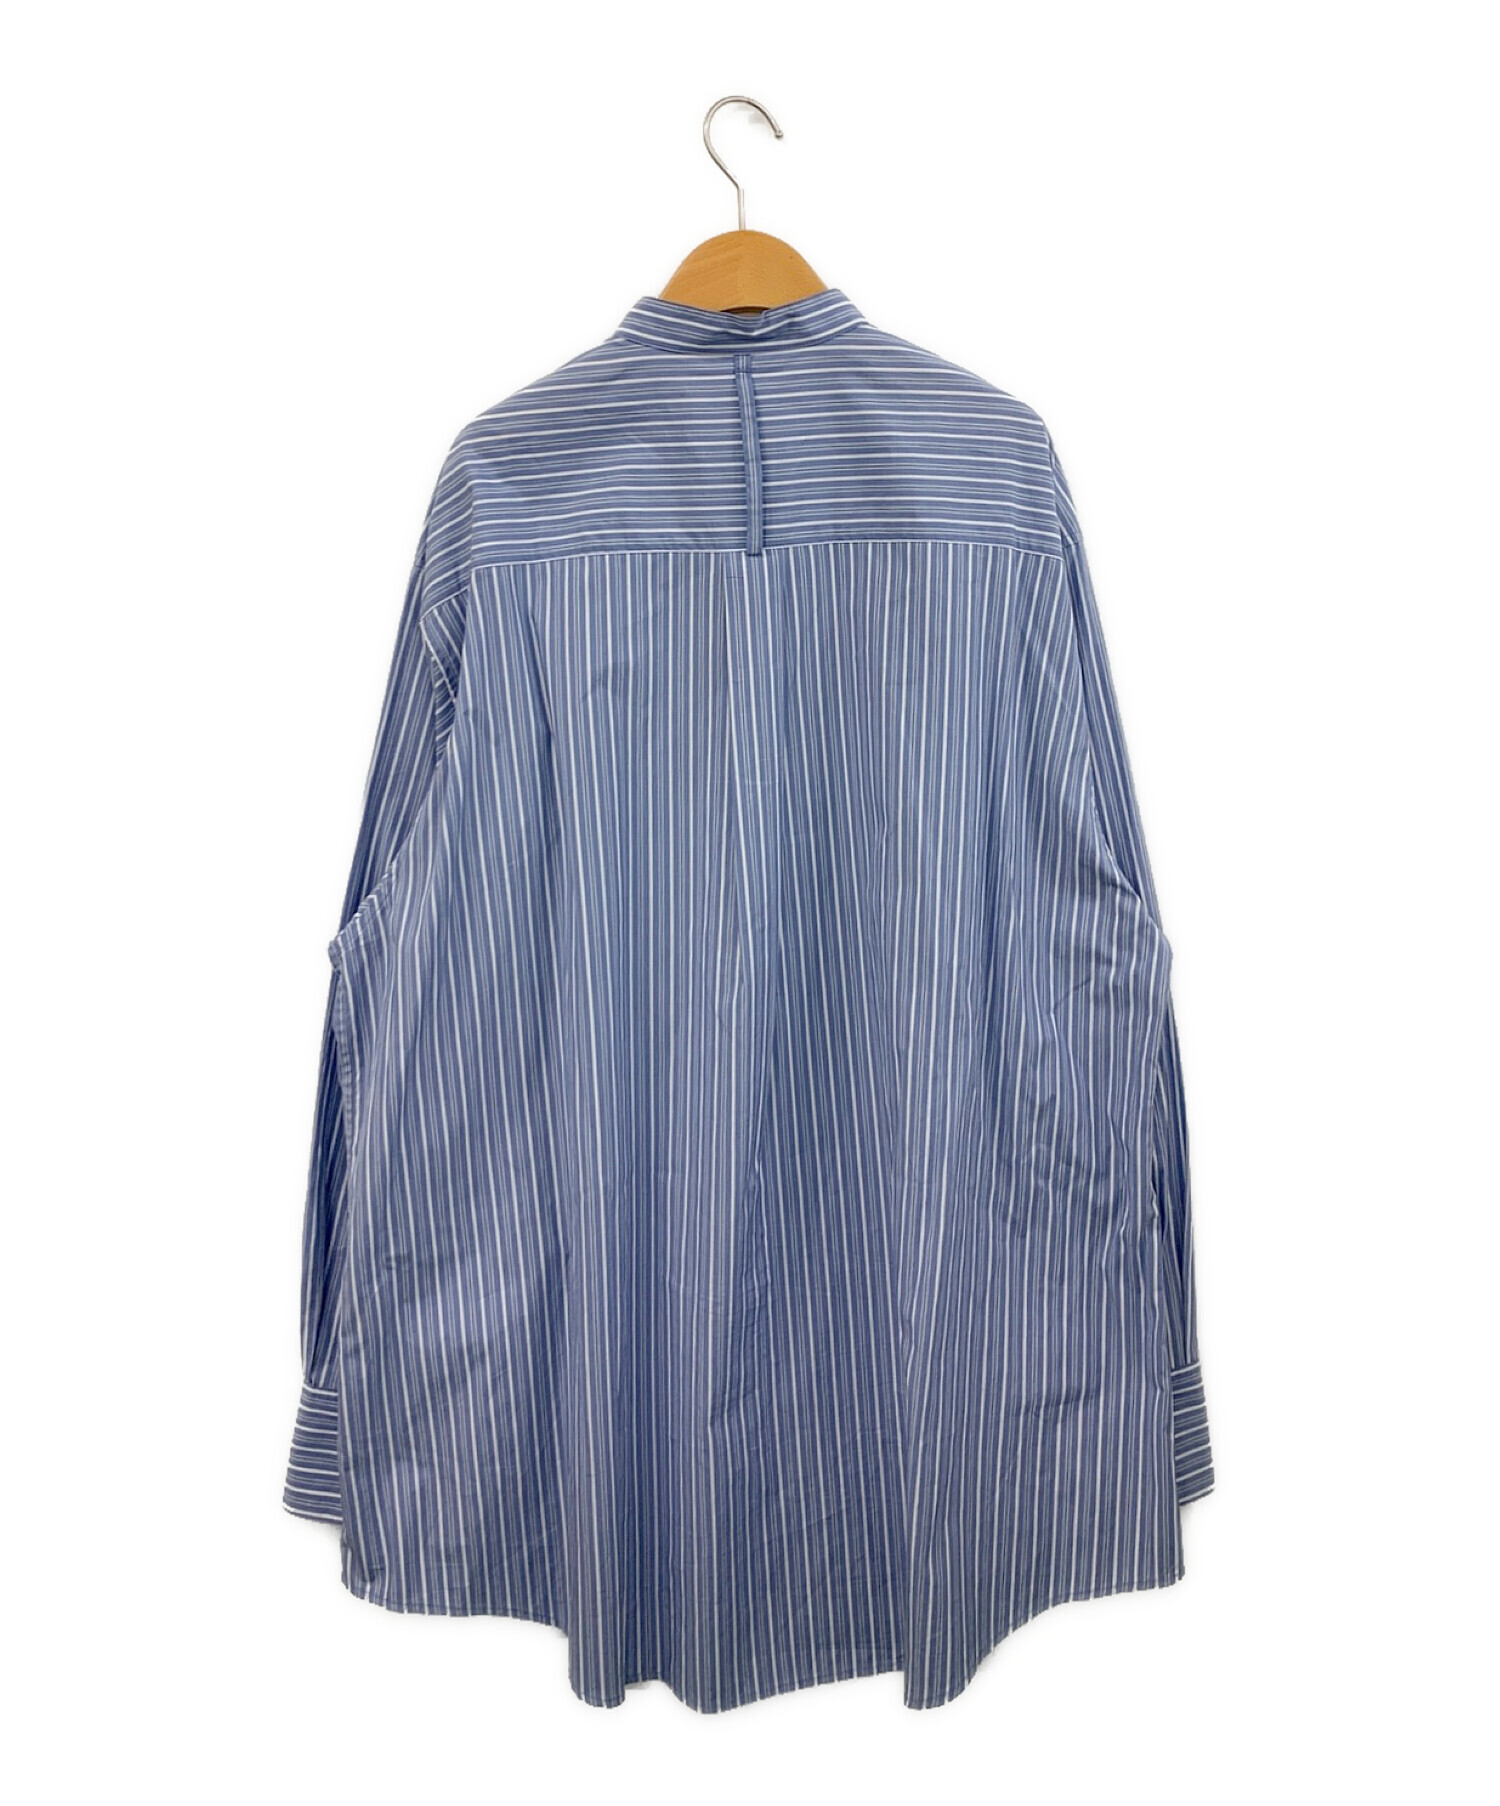 TODAYFUL  /  Stripe Over Shirts ブルー